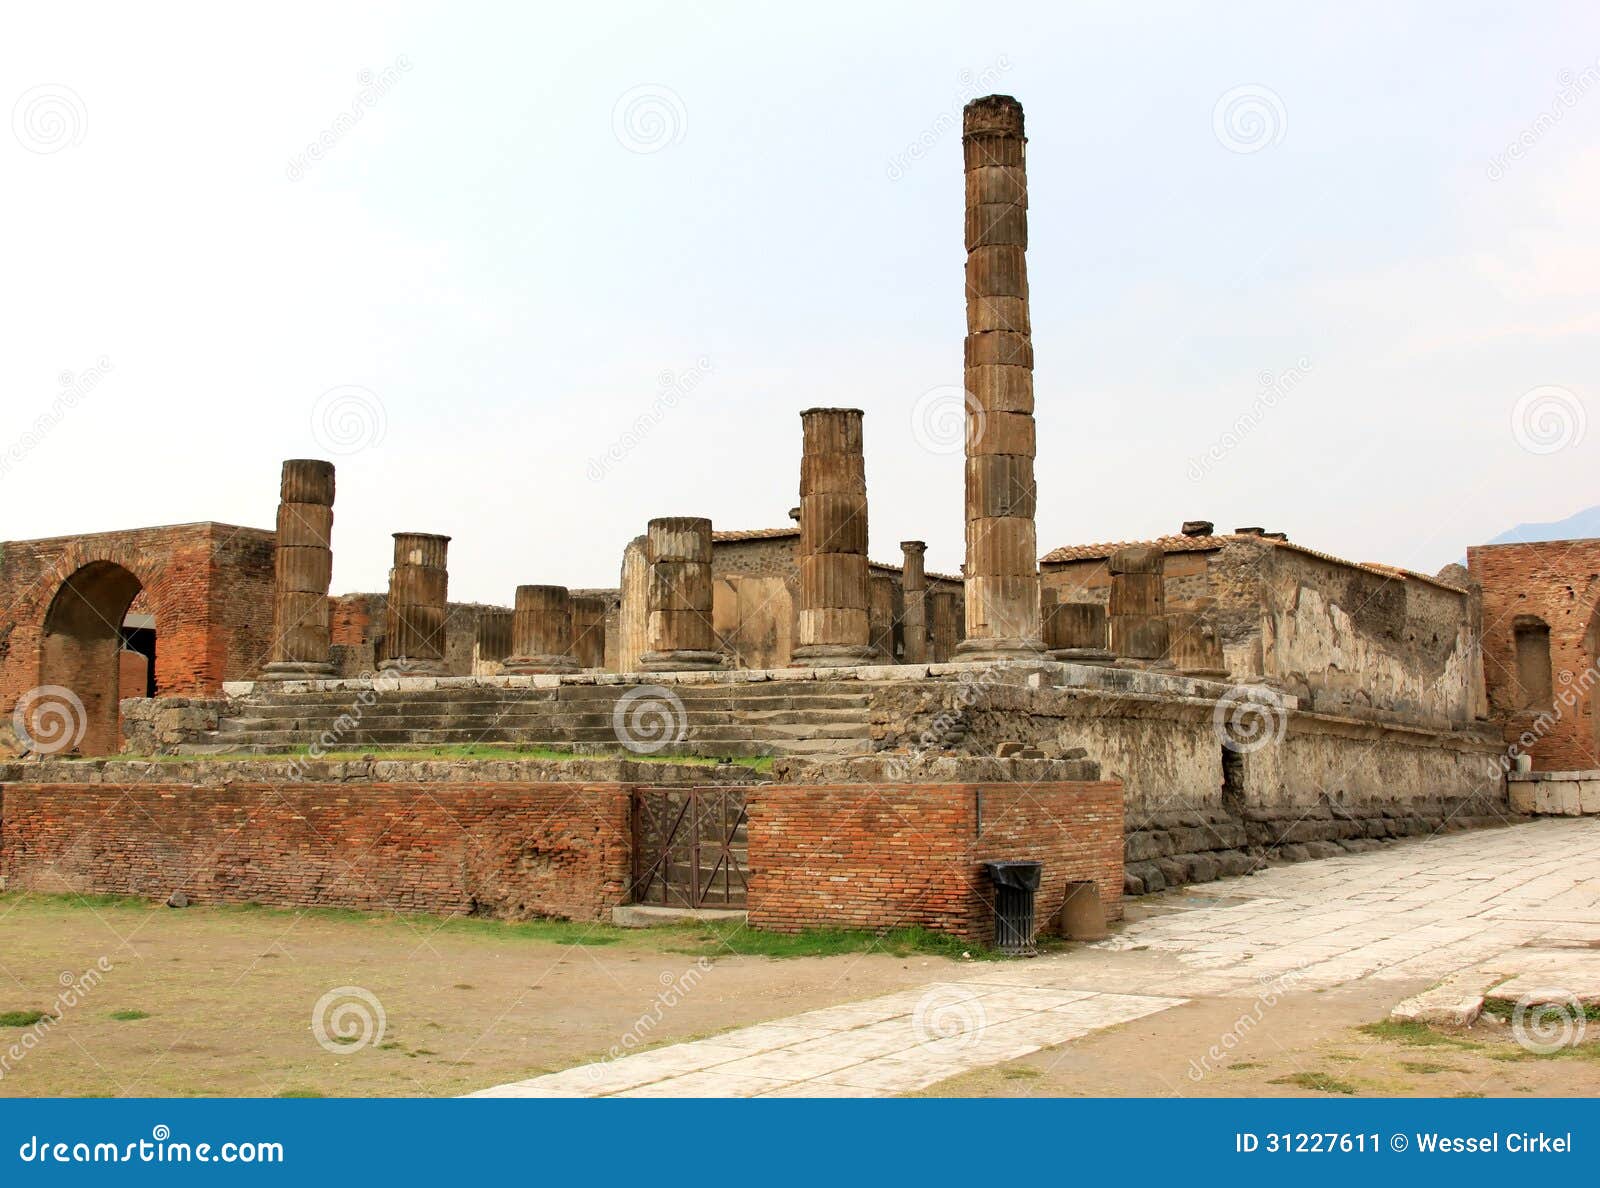 temple of jupiter in ancient pompei, foro, italy